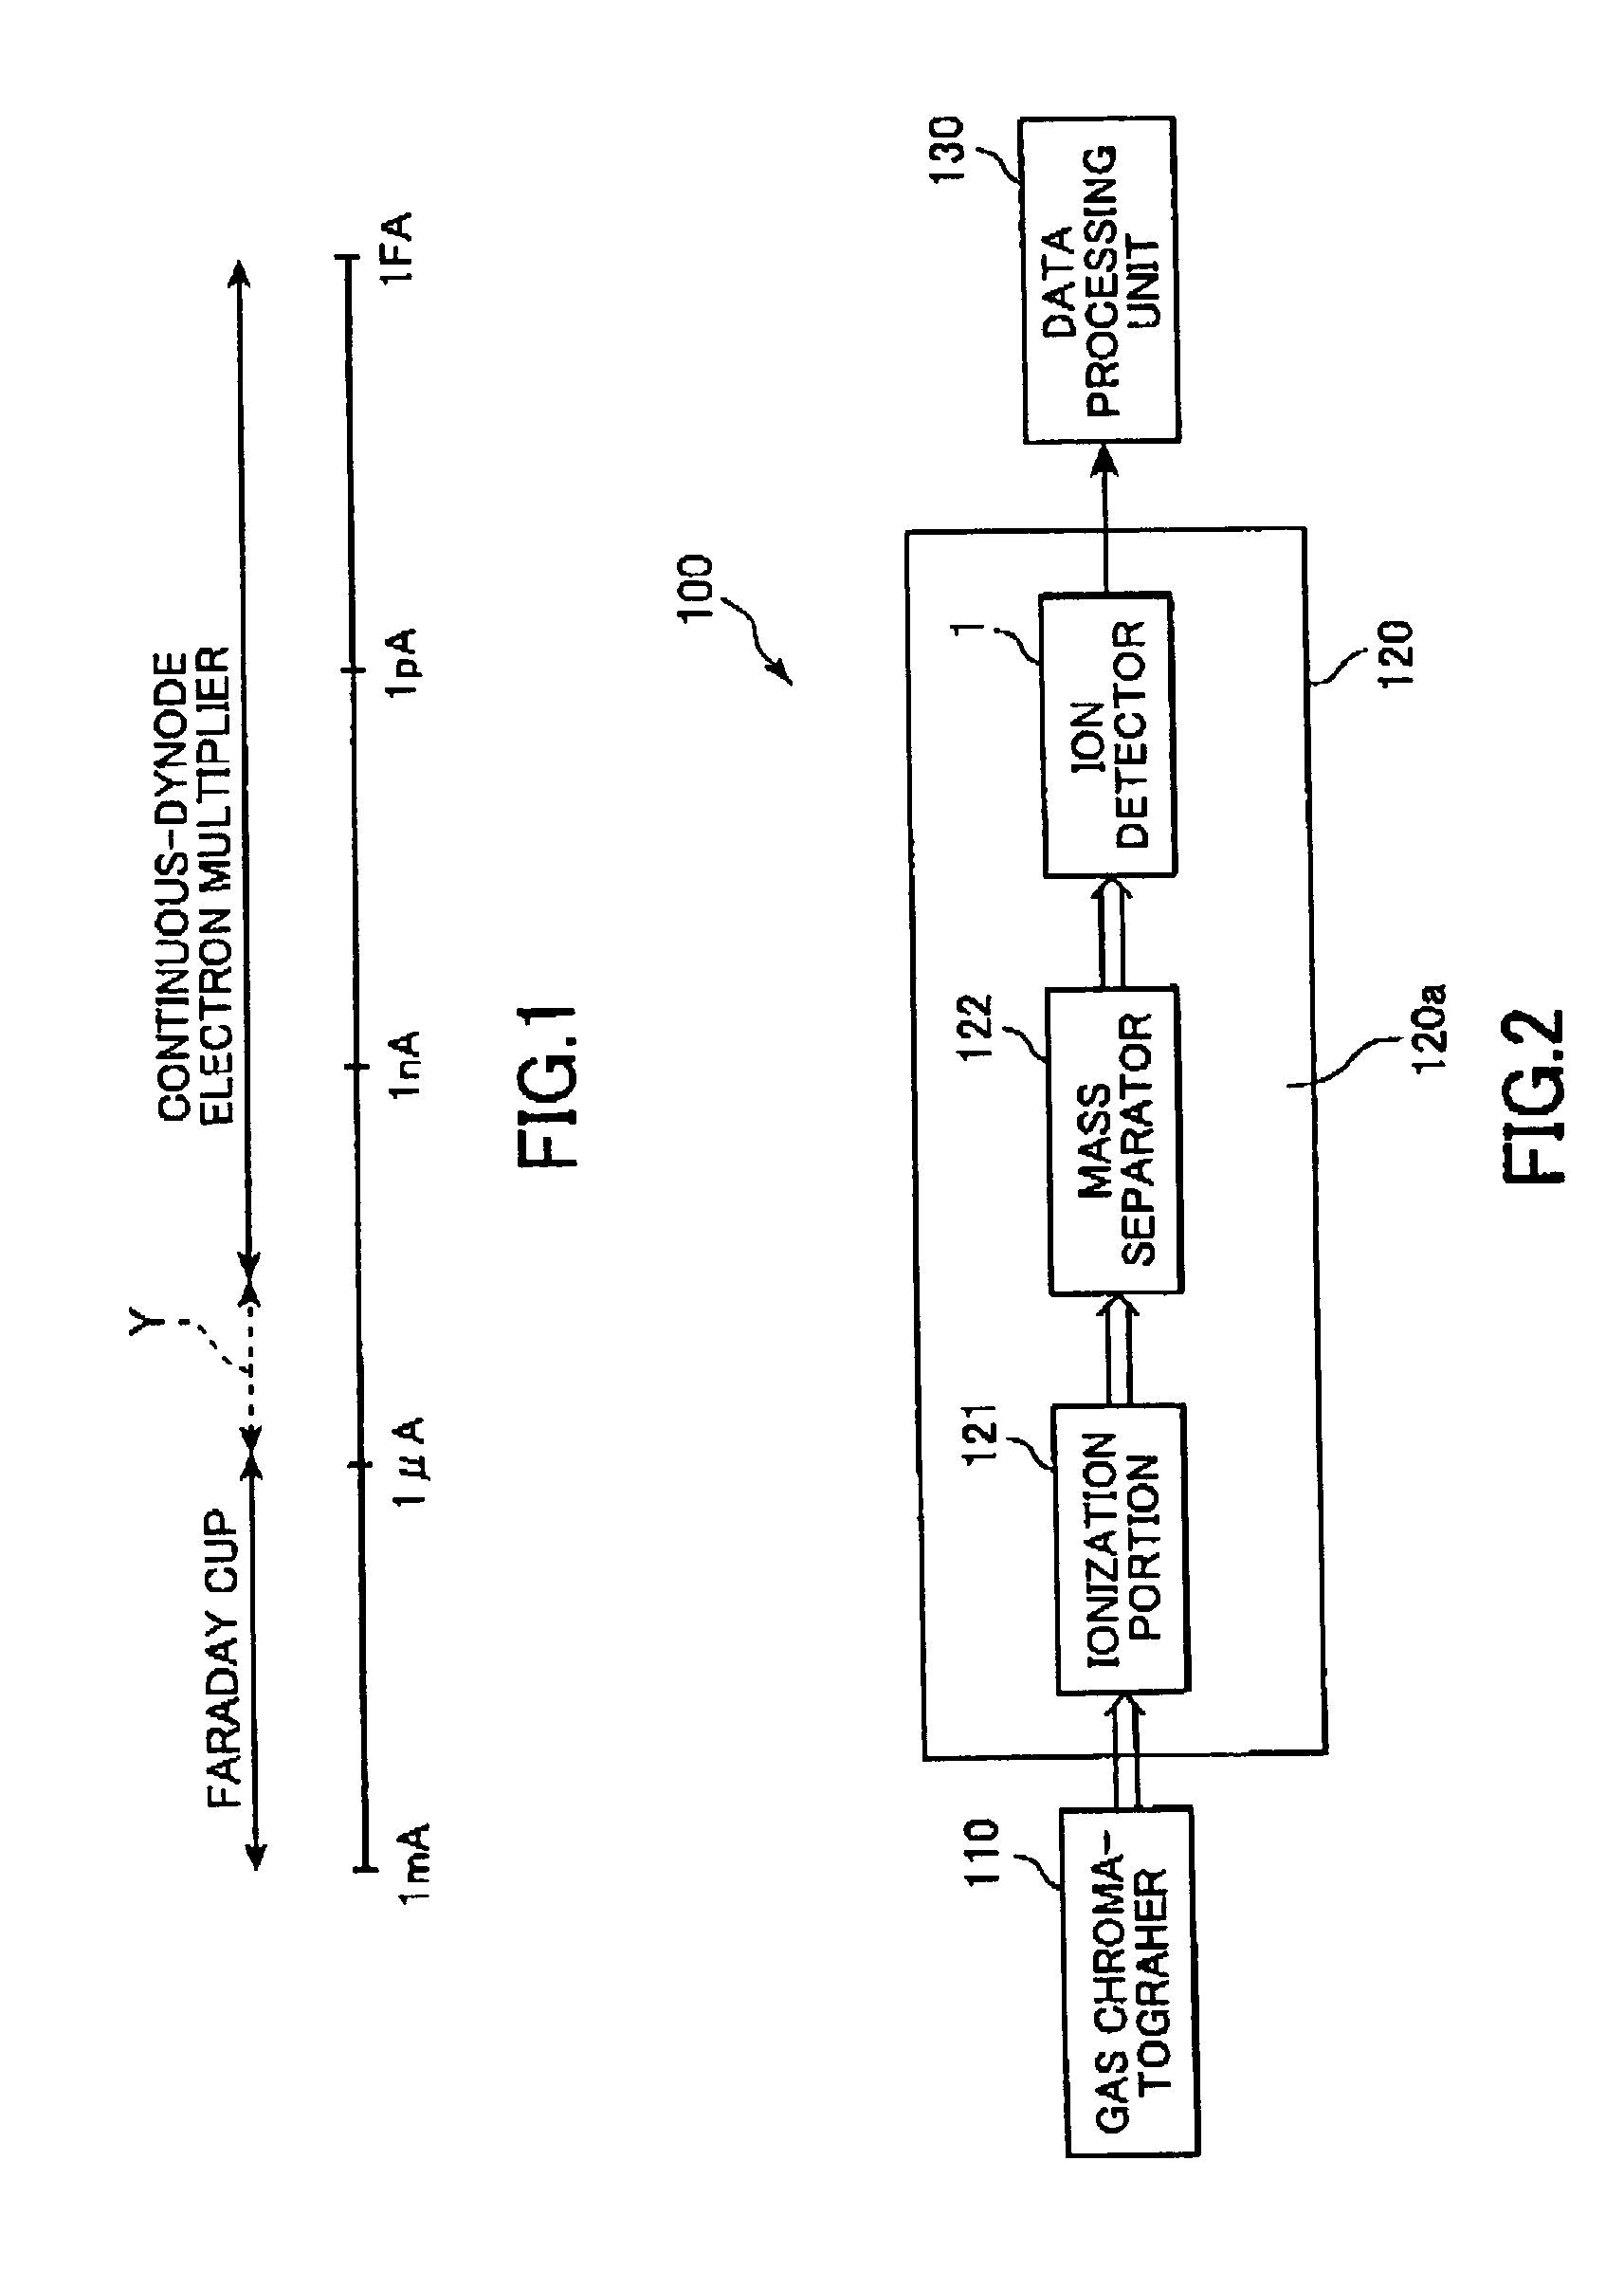 Mass spectrometer and ion detector used therein